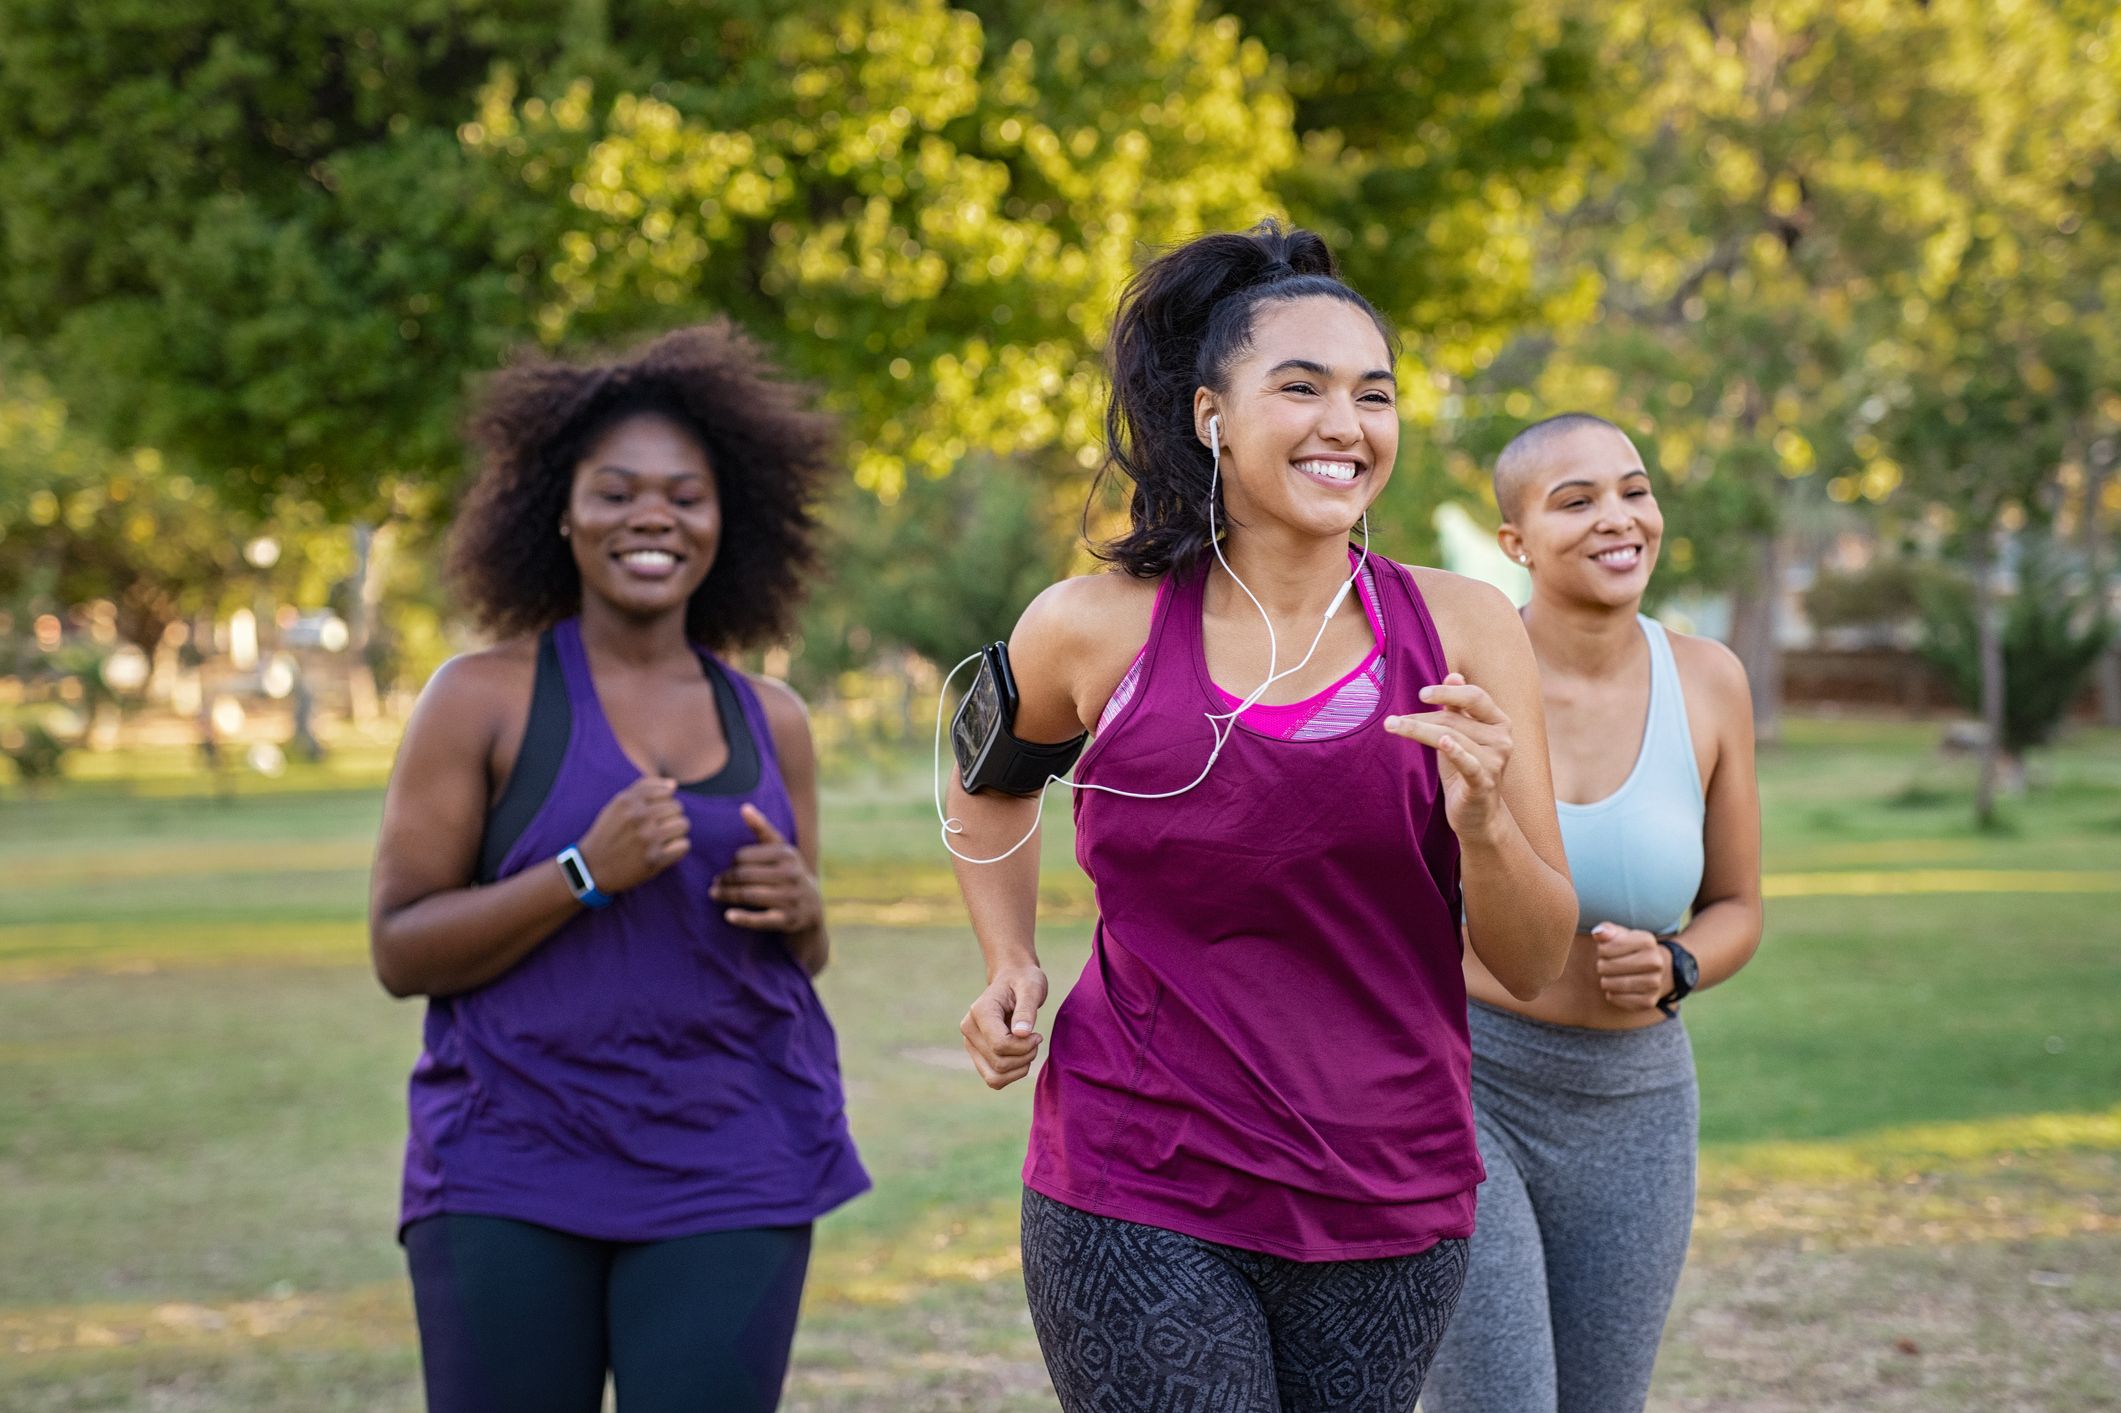 How Much Weight Can You Lose If You Jog for 15 Minutes Each Day